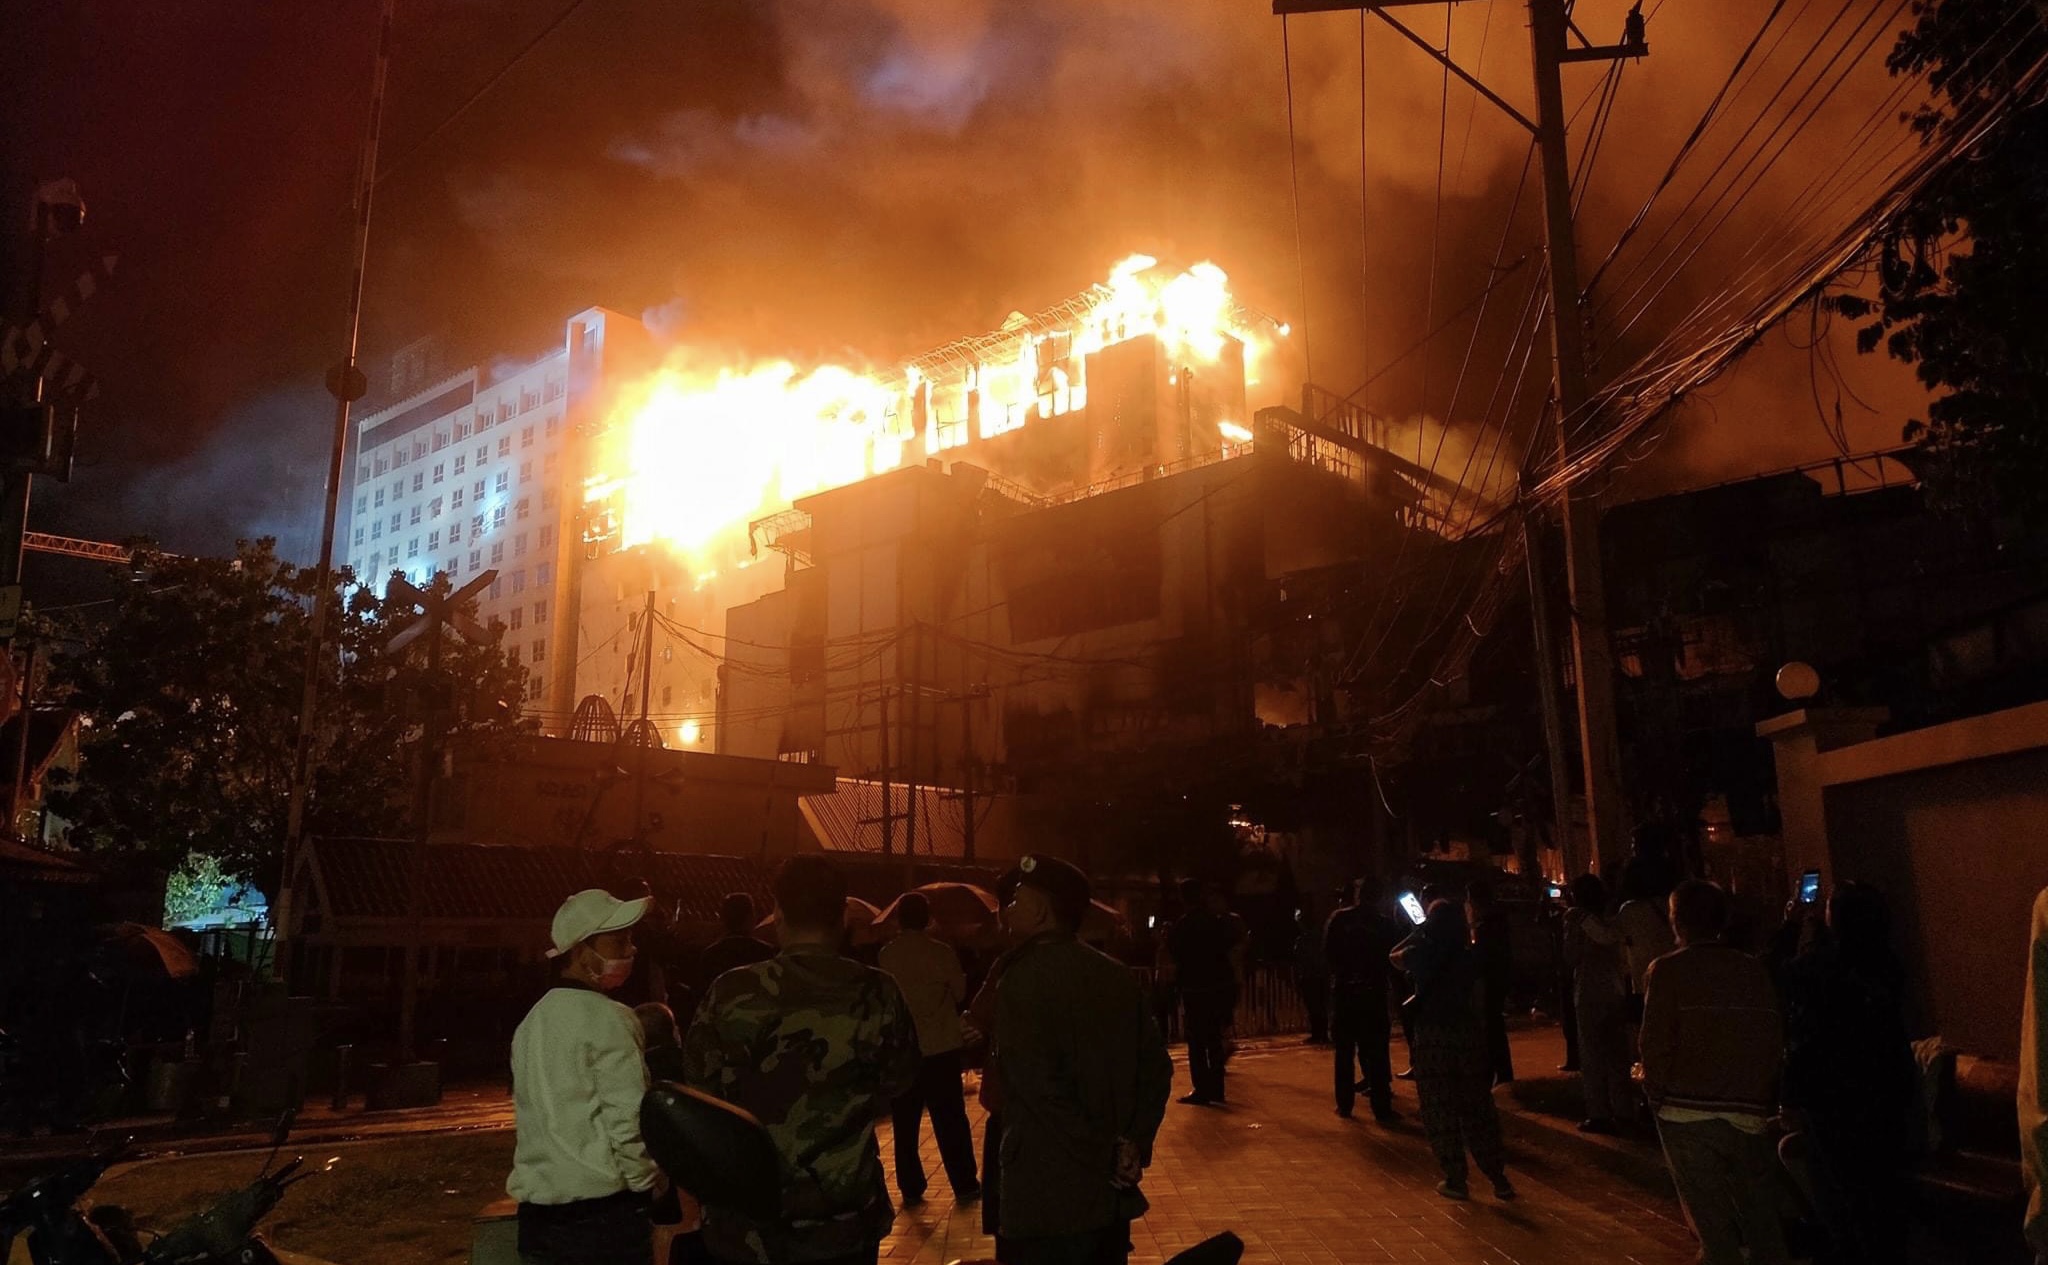 A fire at Grand Diamond City Hotel and Casino in Poipet started around 11pm on December 28. (Banteay Menachey provincial police Facebook page)